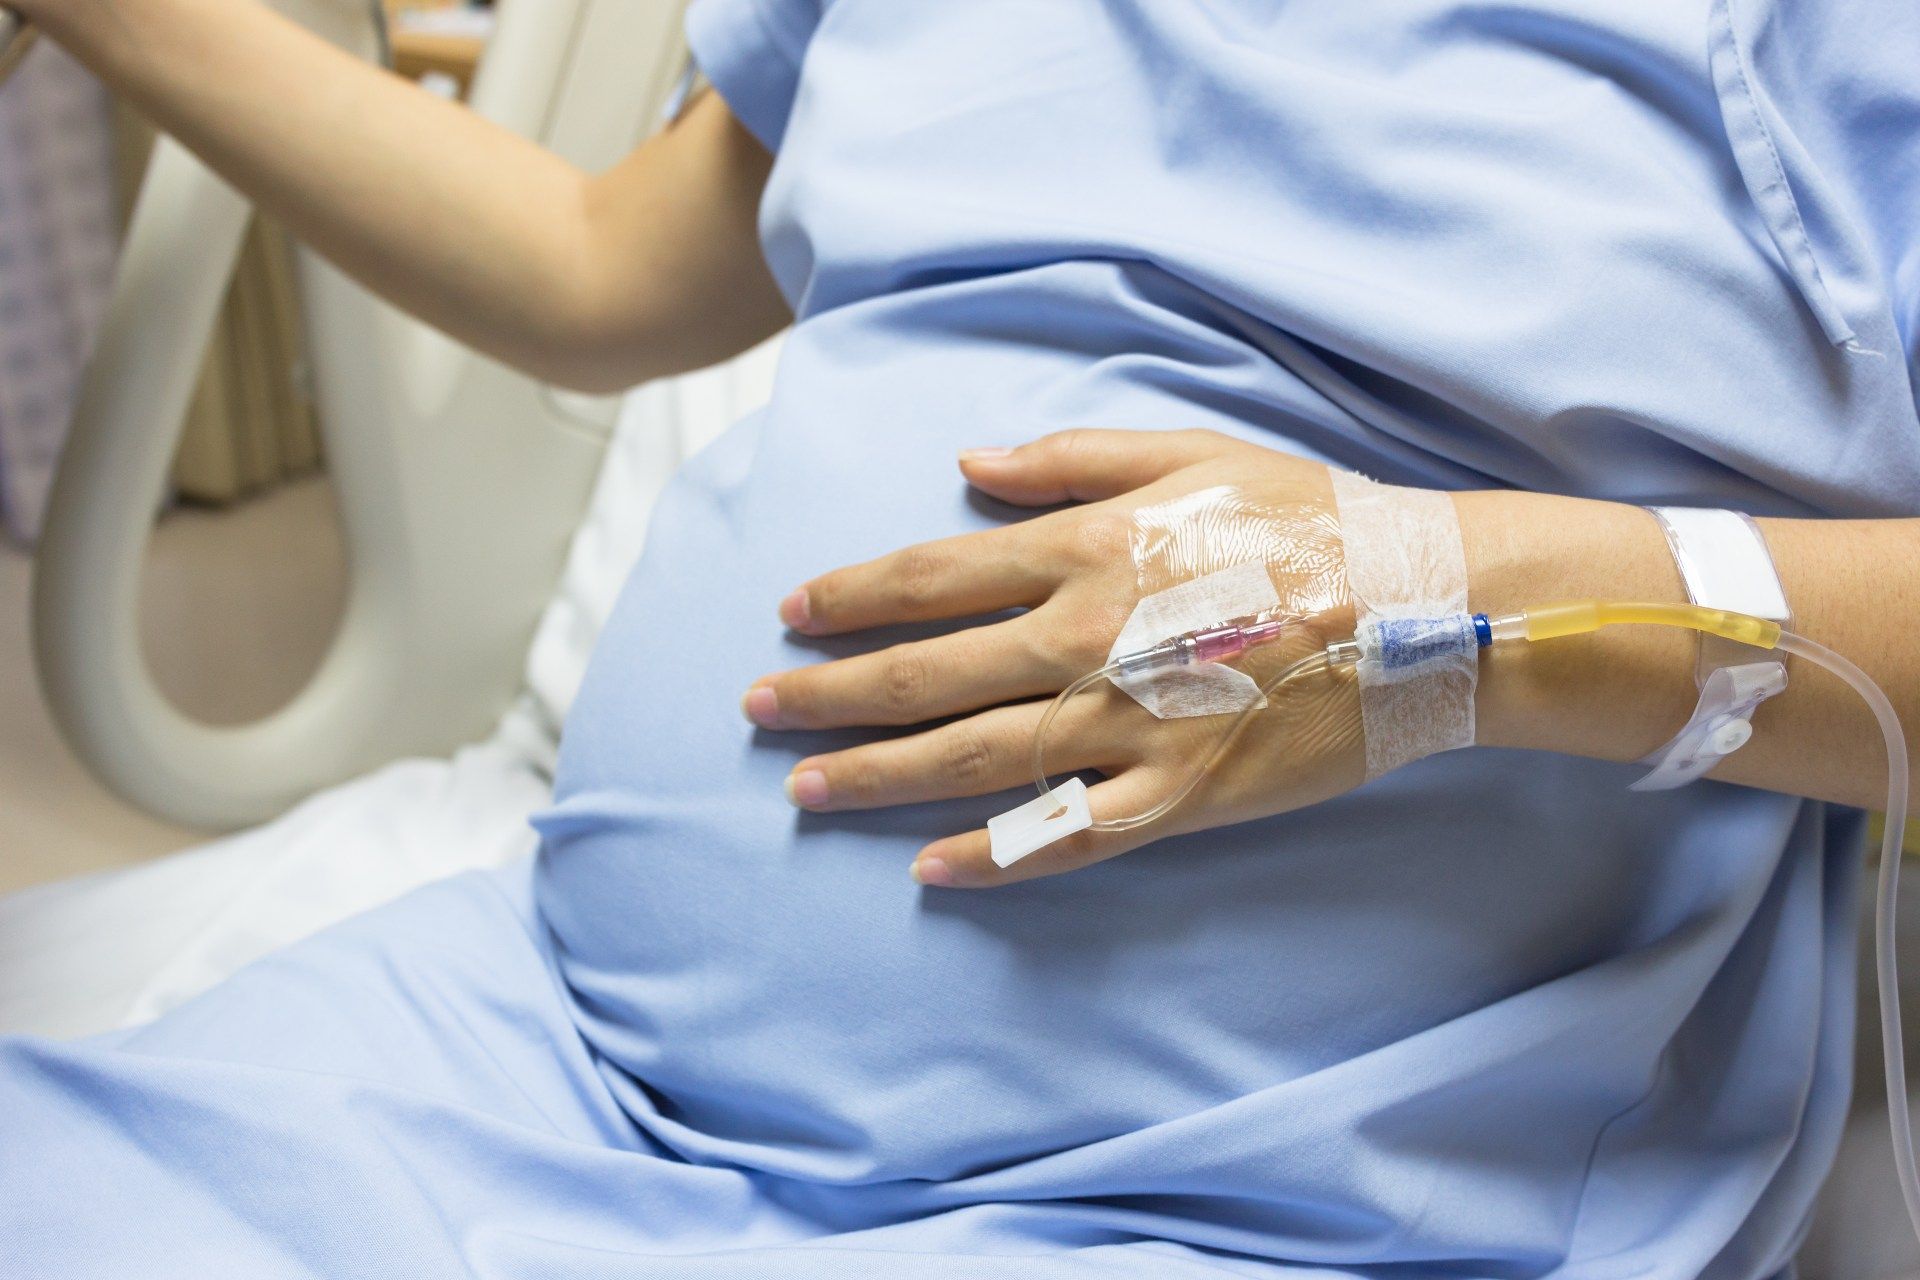 Closeup of a pregnant woman's arm and abdomen as she sits wearing a blue gown in a hospital bed - primodos victims